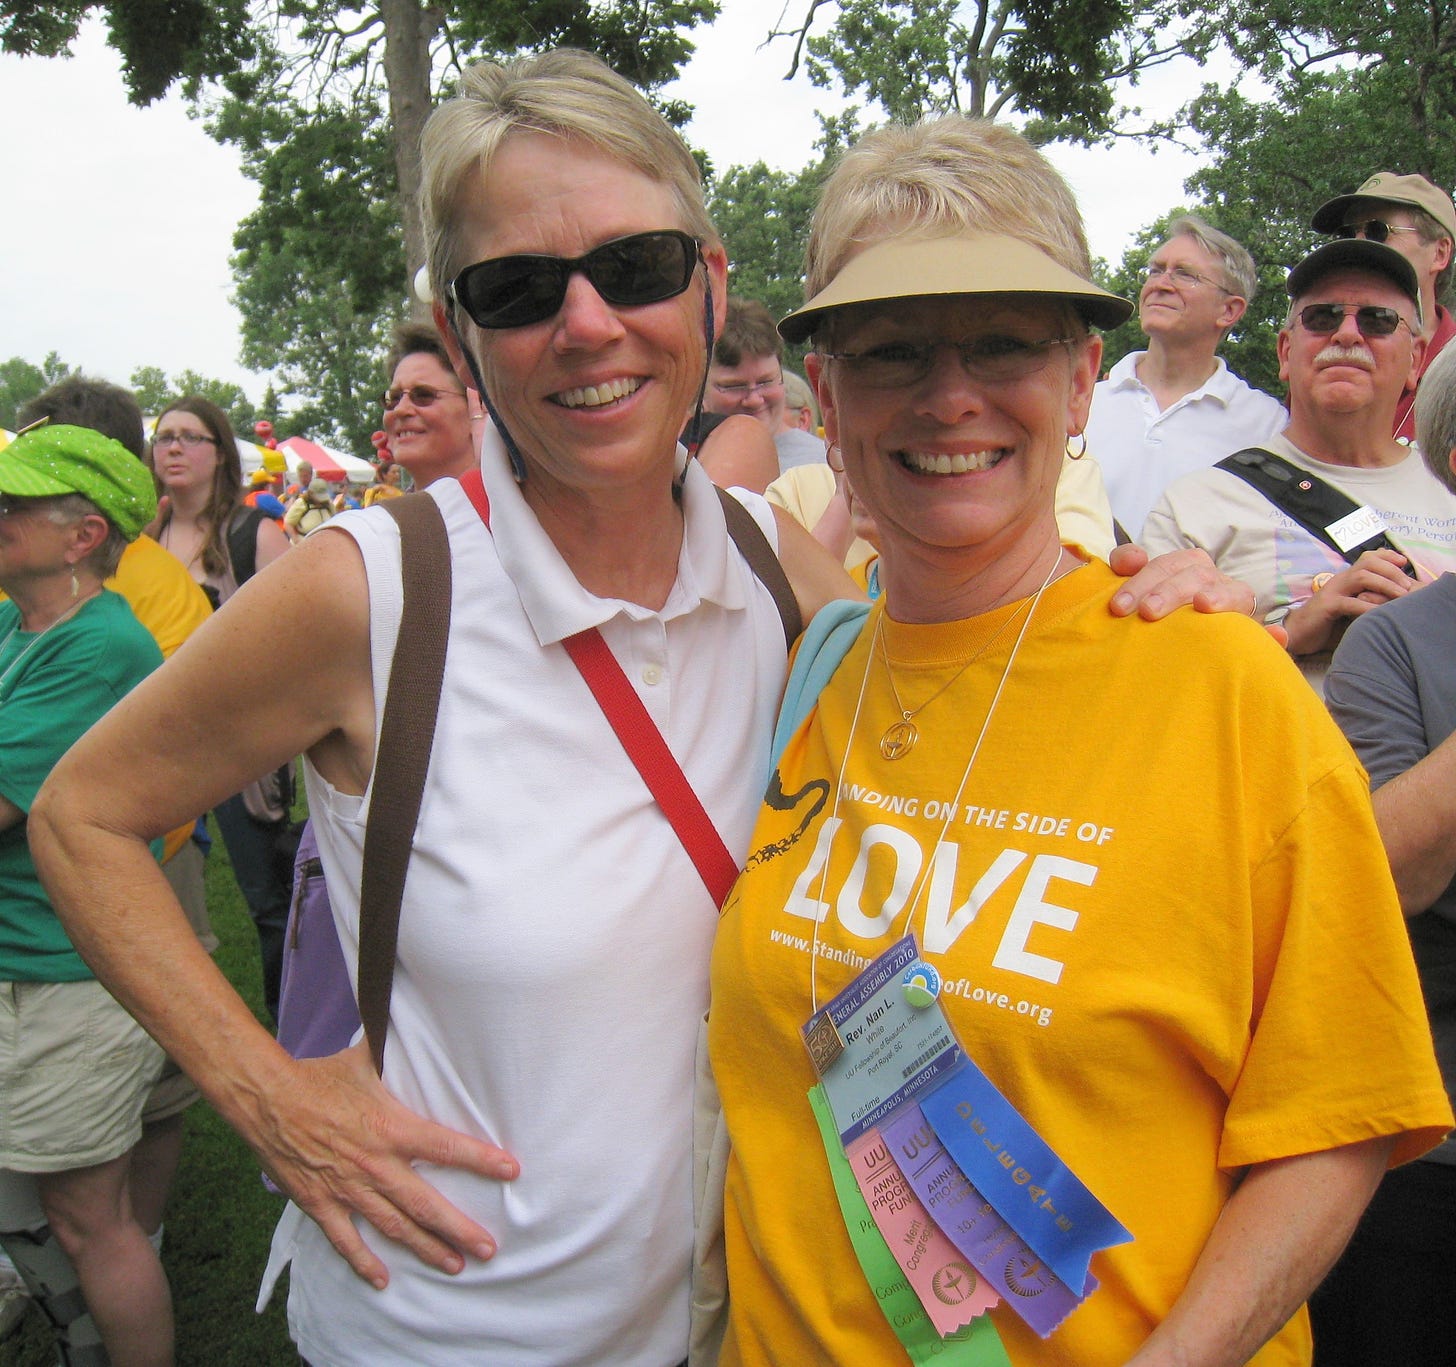 Two women with short-cropped hair--one in a white shirt with one hand on her hip and the other around the other woman. The other wearing a visor and a goldenrod Standing on the Side of Love shirt. 